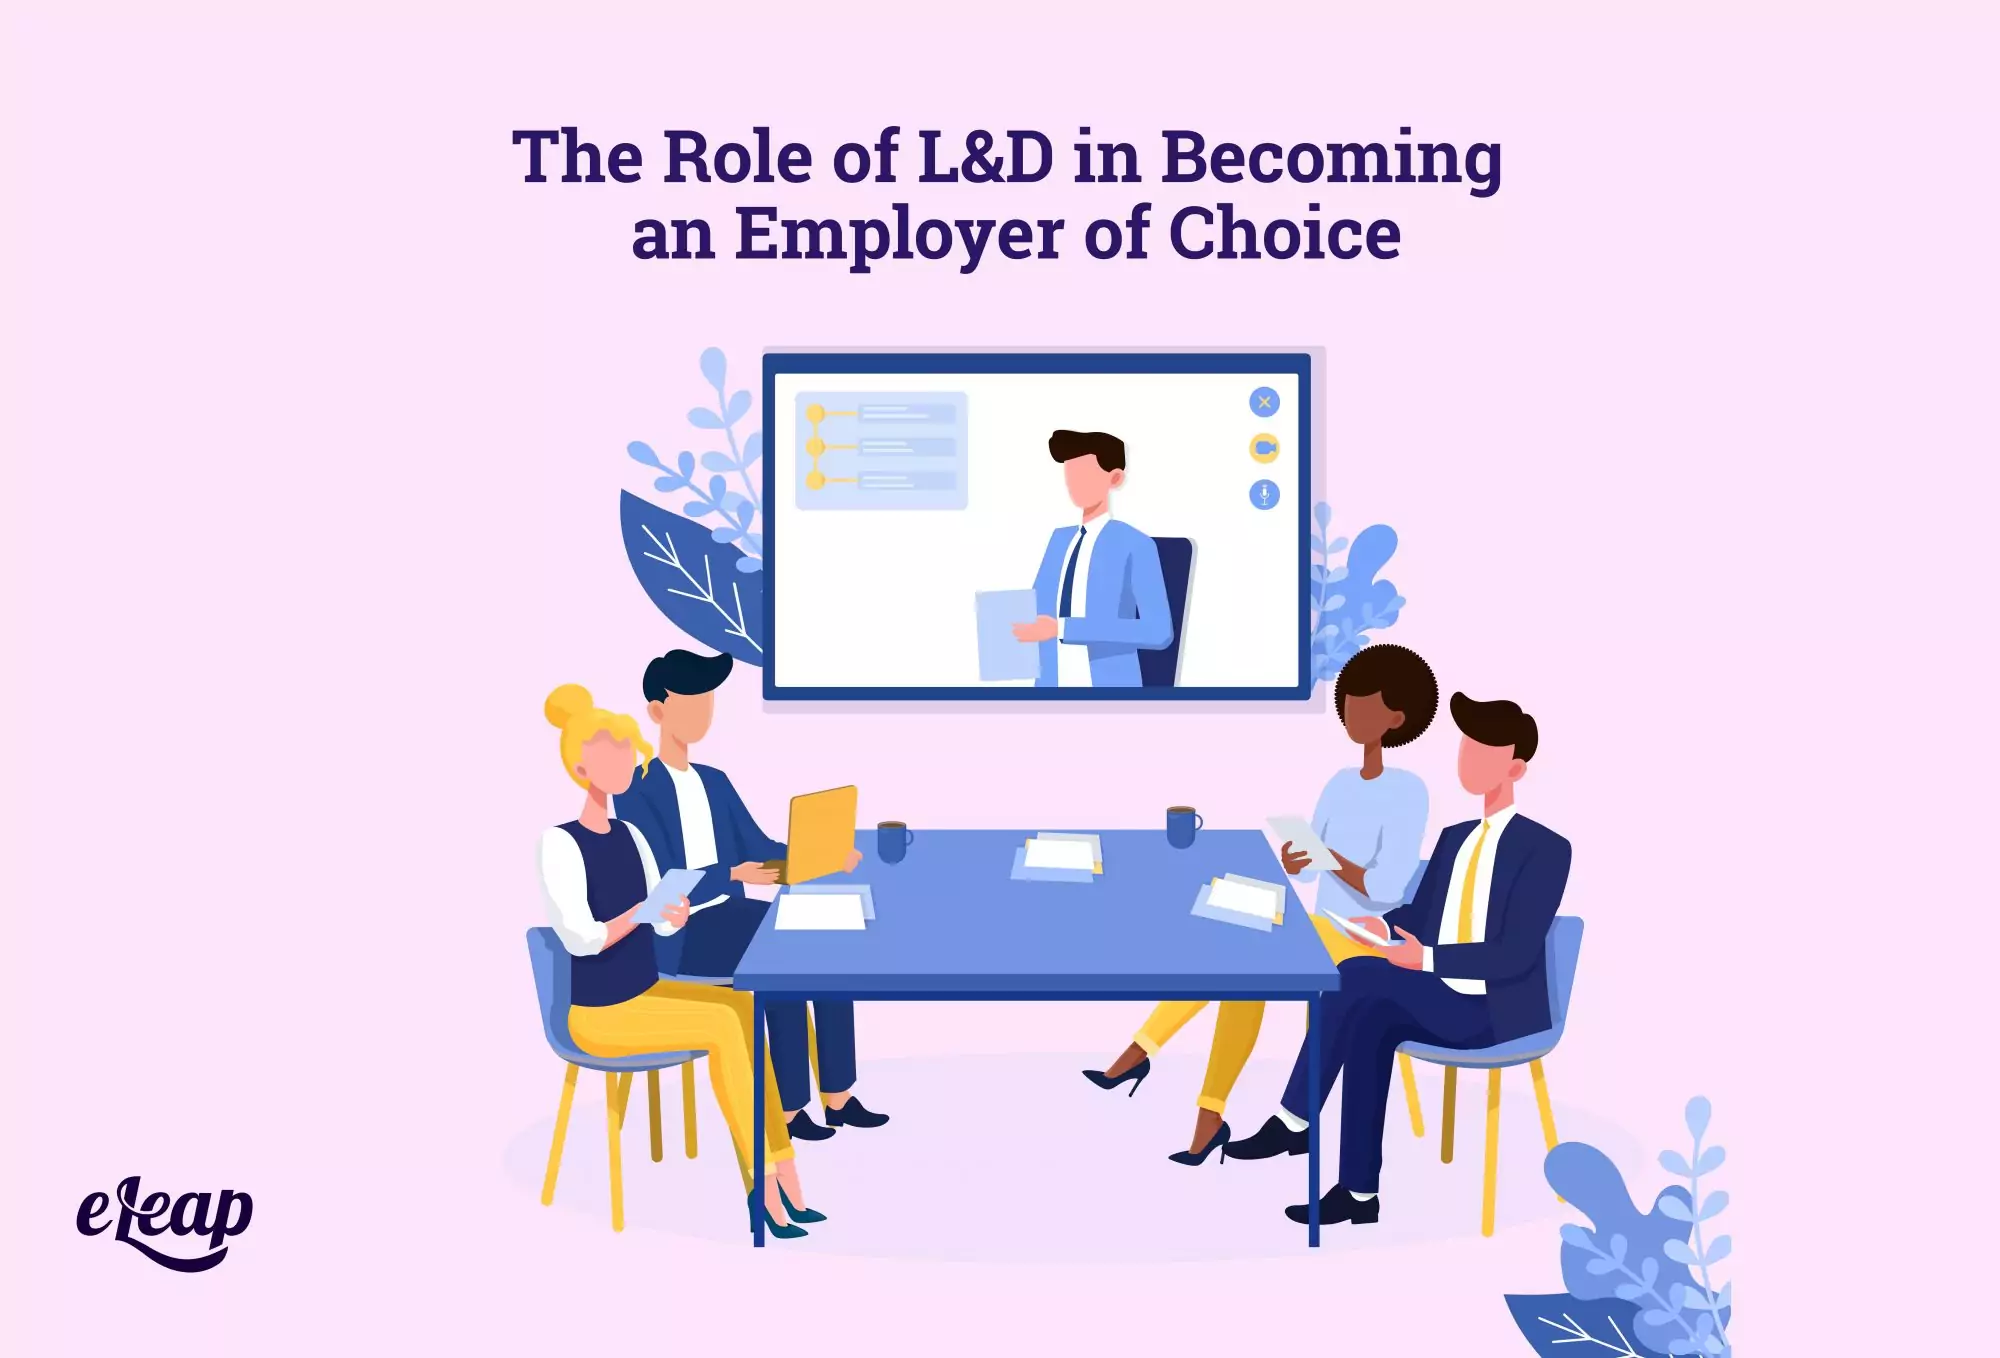 The Role of L&D in Becoming an Employer of Choice